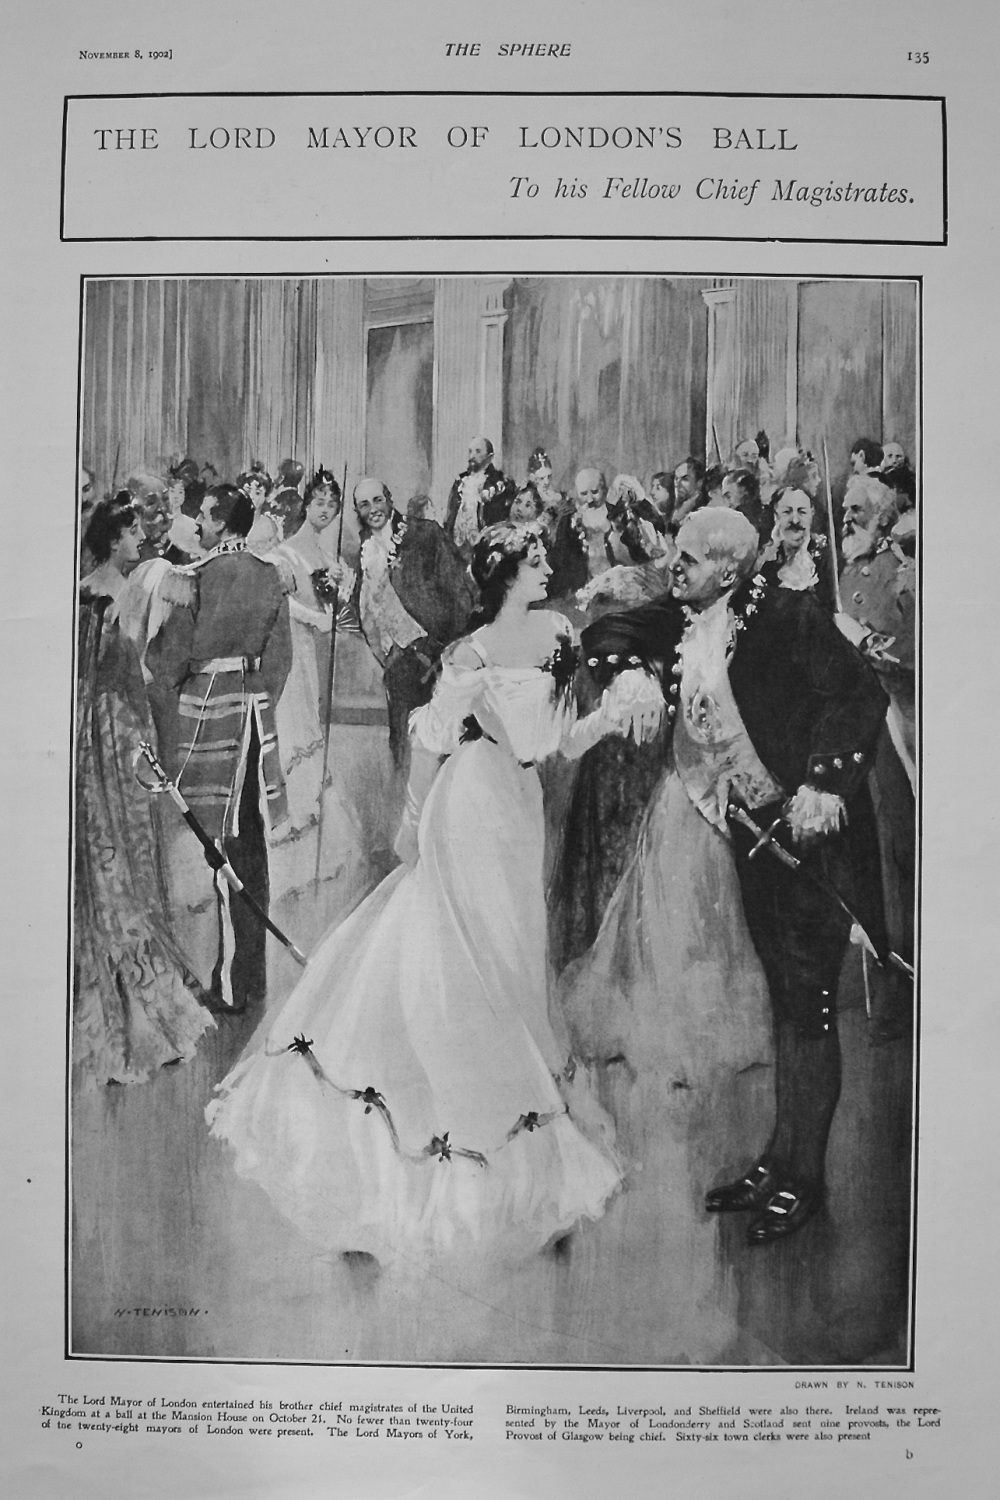 The Lord Mayor of London's Ball. 1902